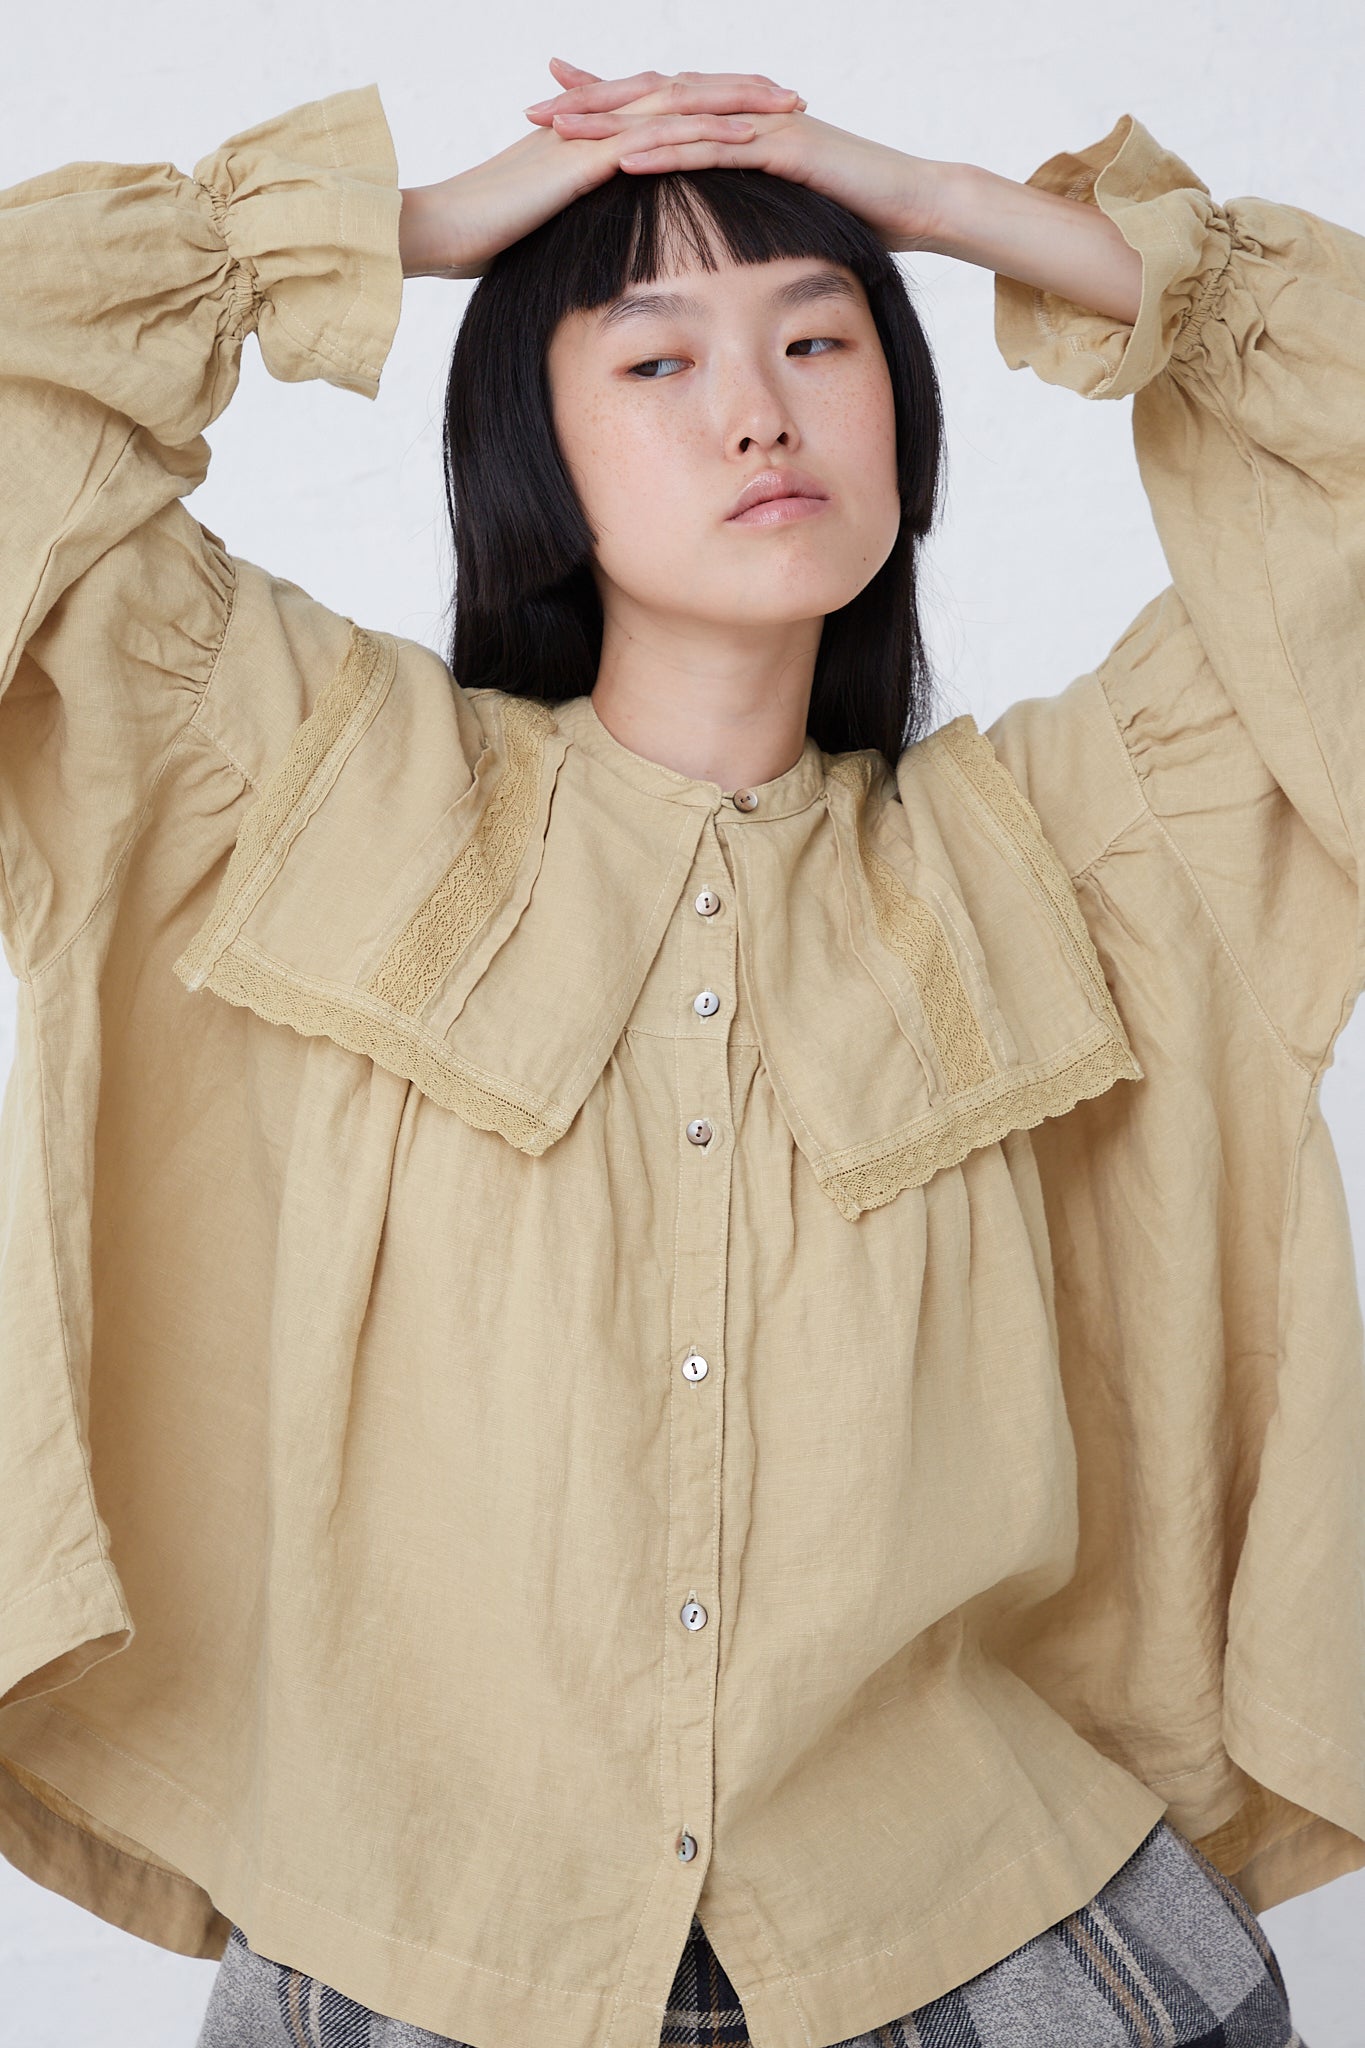 nest Robe - Natural Dyed Linen Lace Blouse in Yellow | Oroboro ...